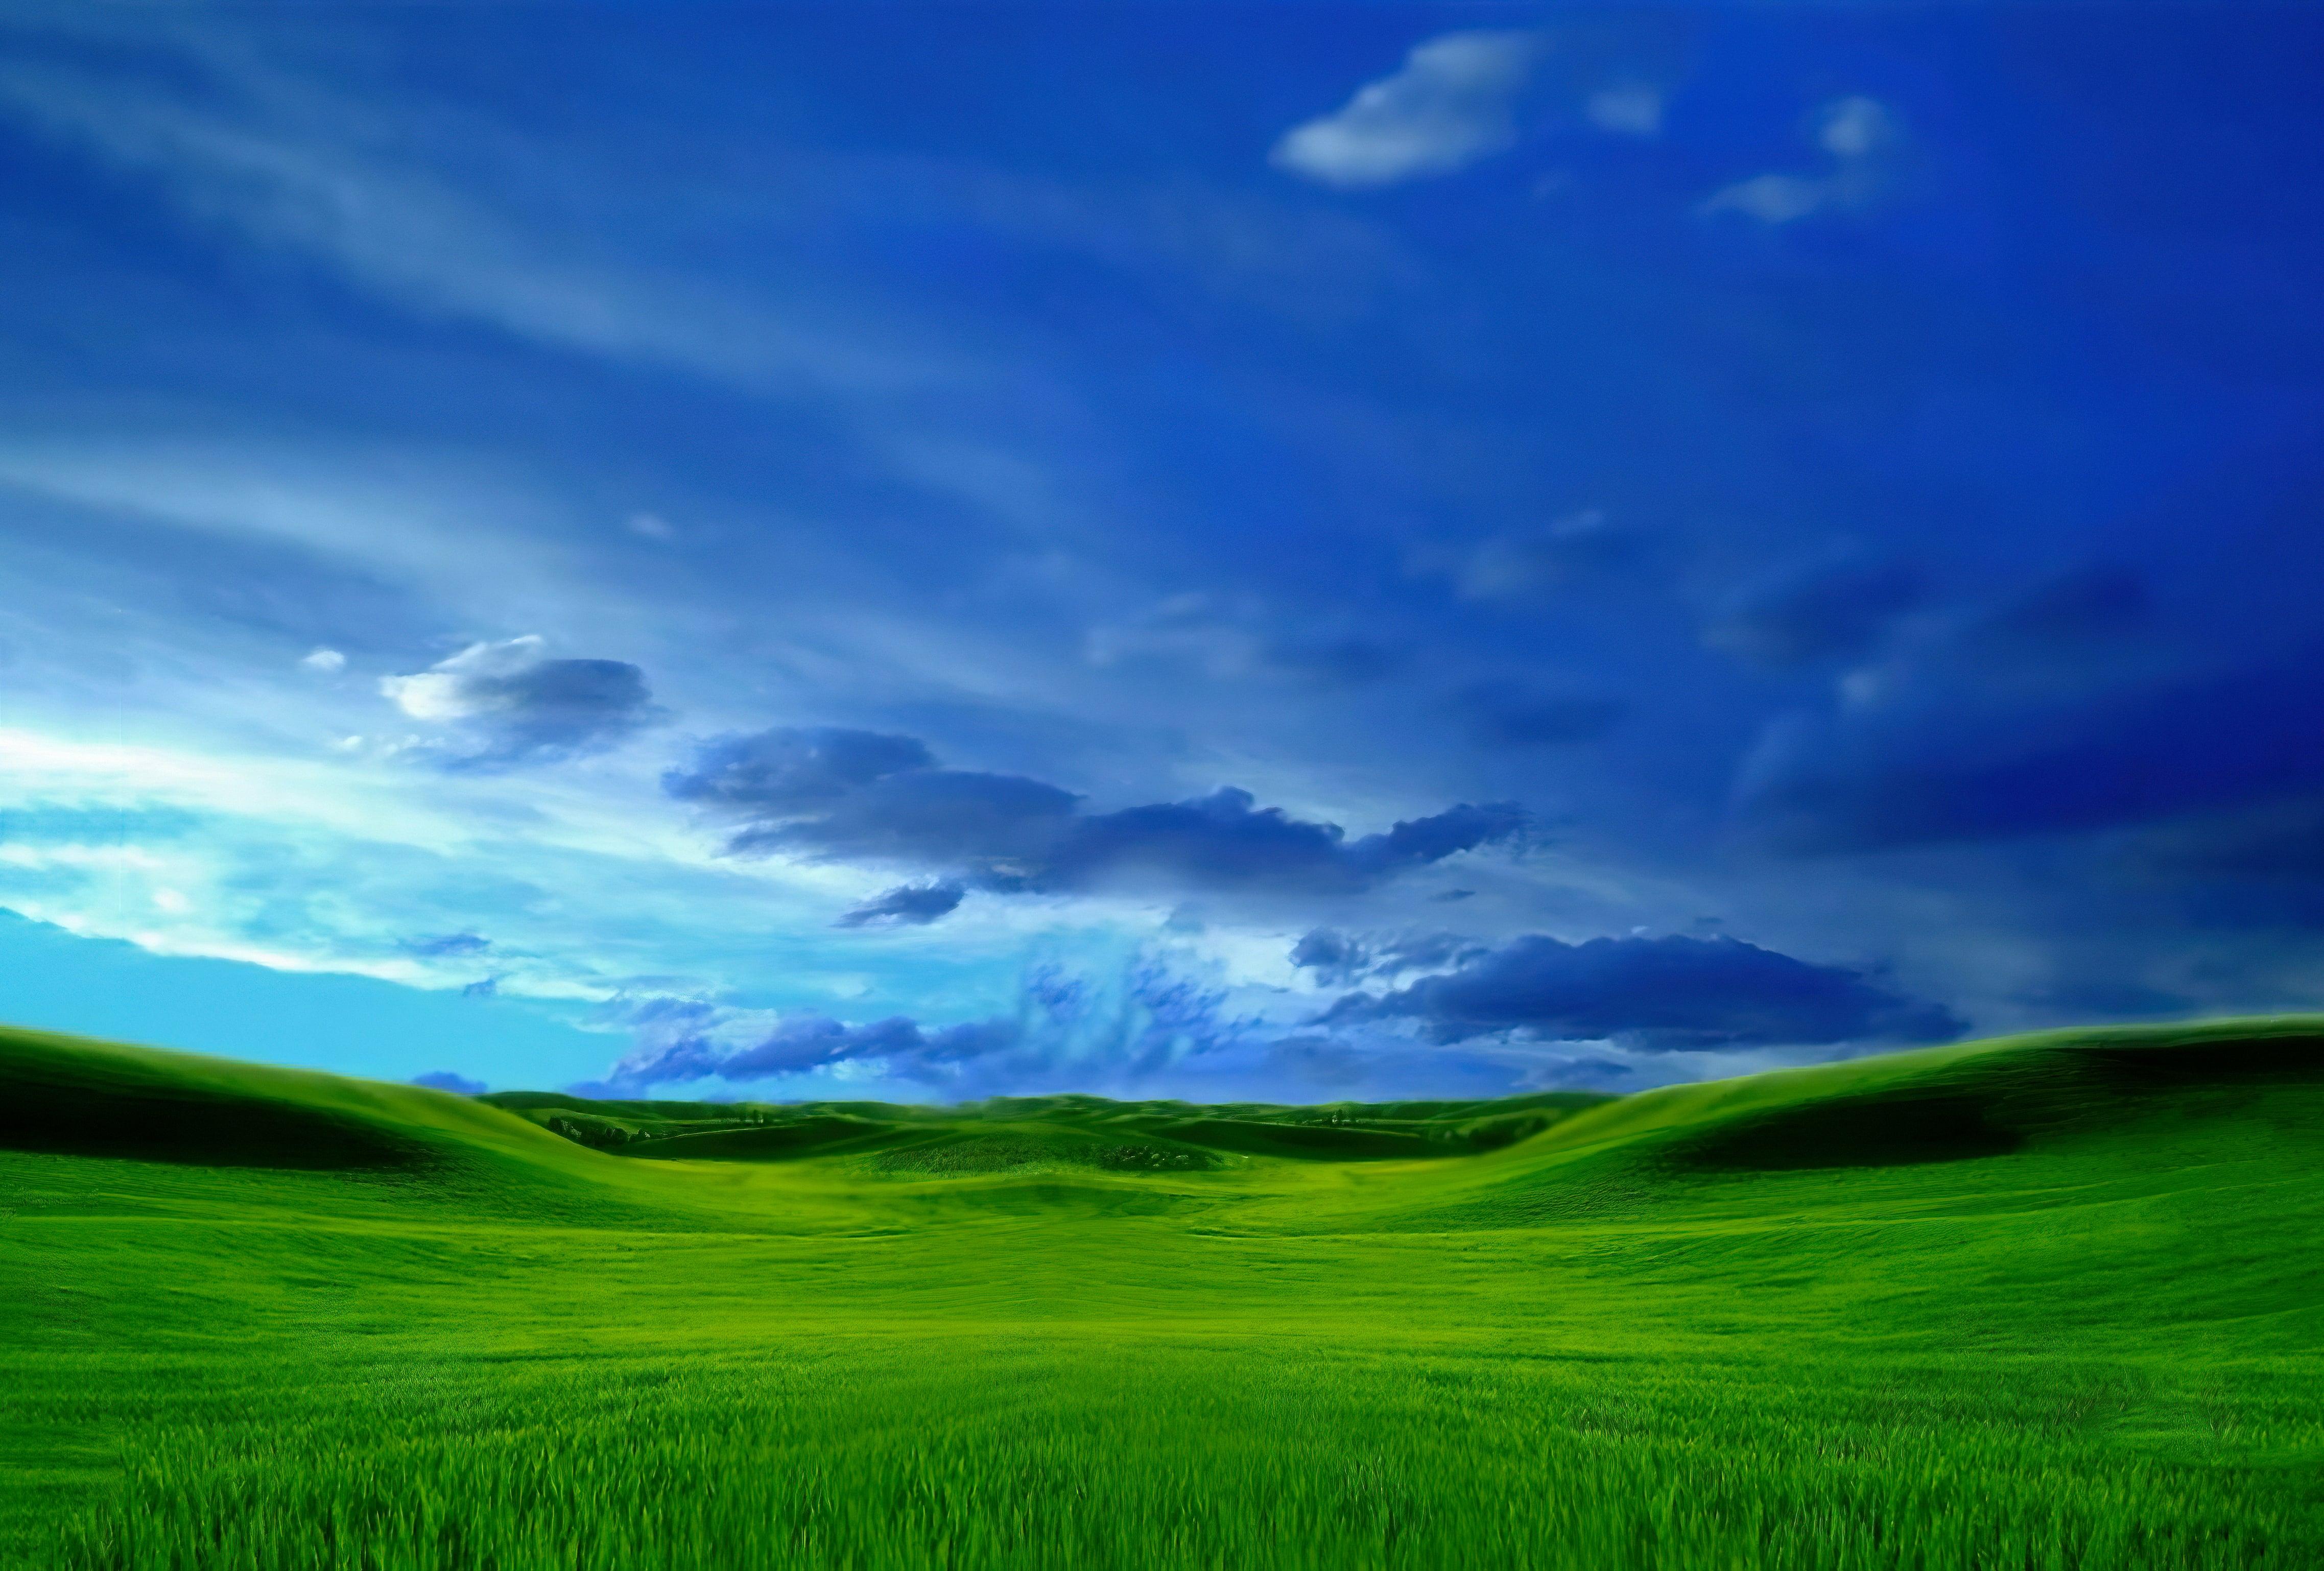 New Bliss From Windows Xp Royal Theme Upscaled To 4k R Windowsxp